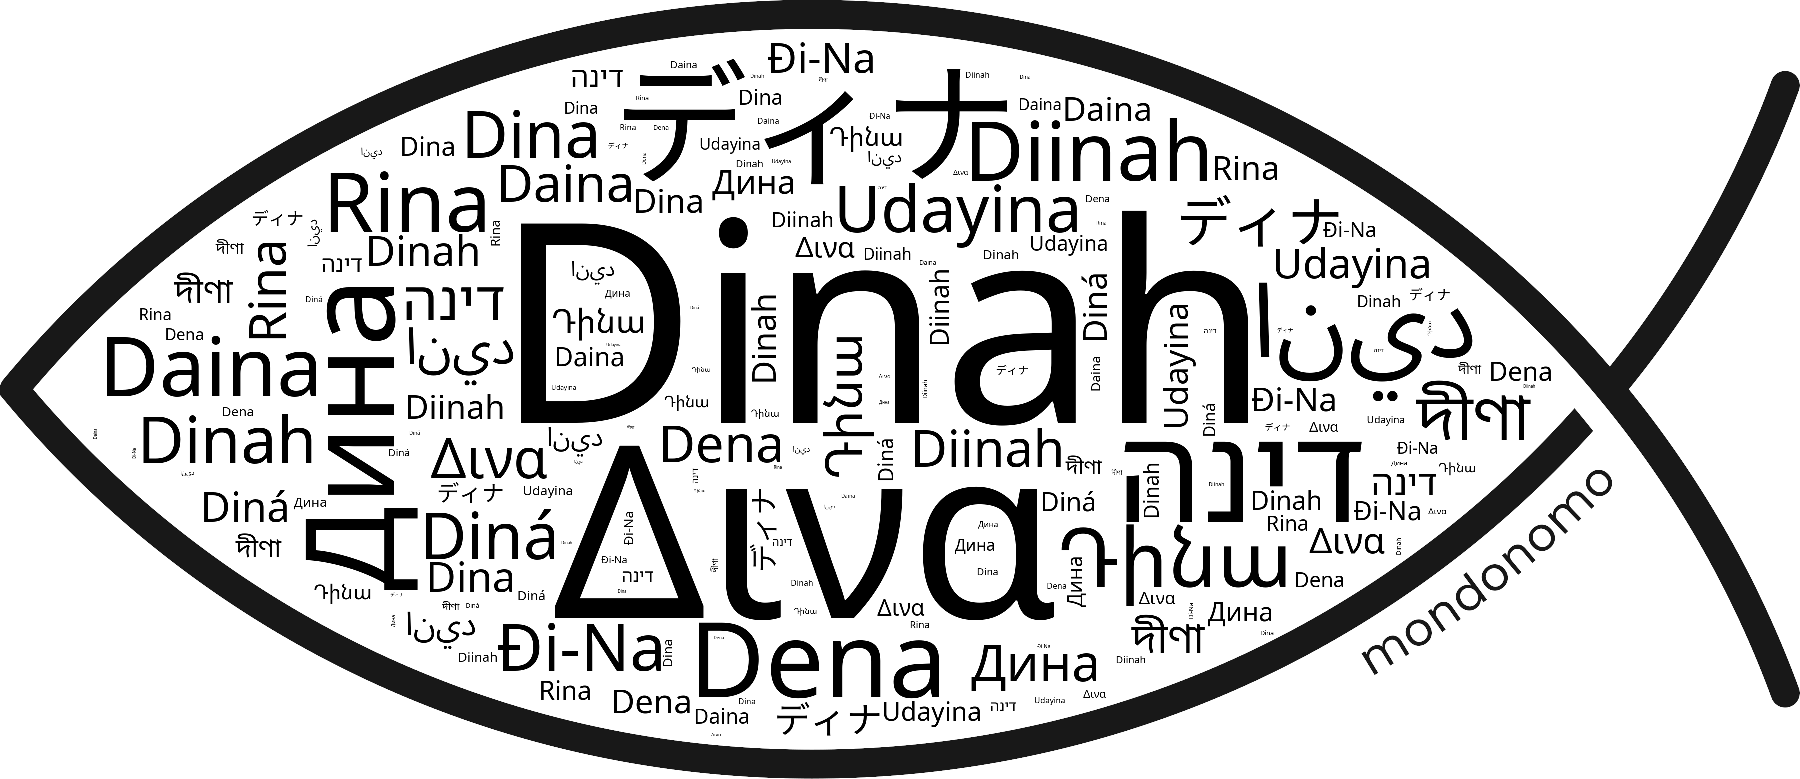 Name Dinah in the world's Bibles